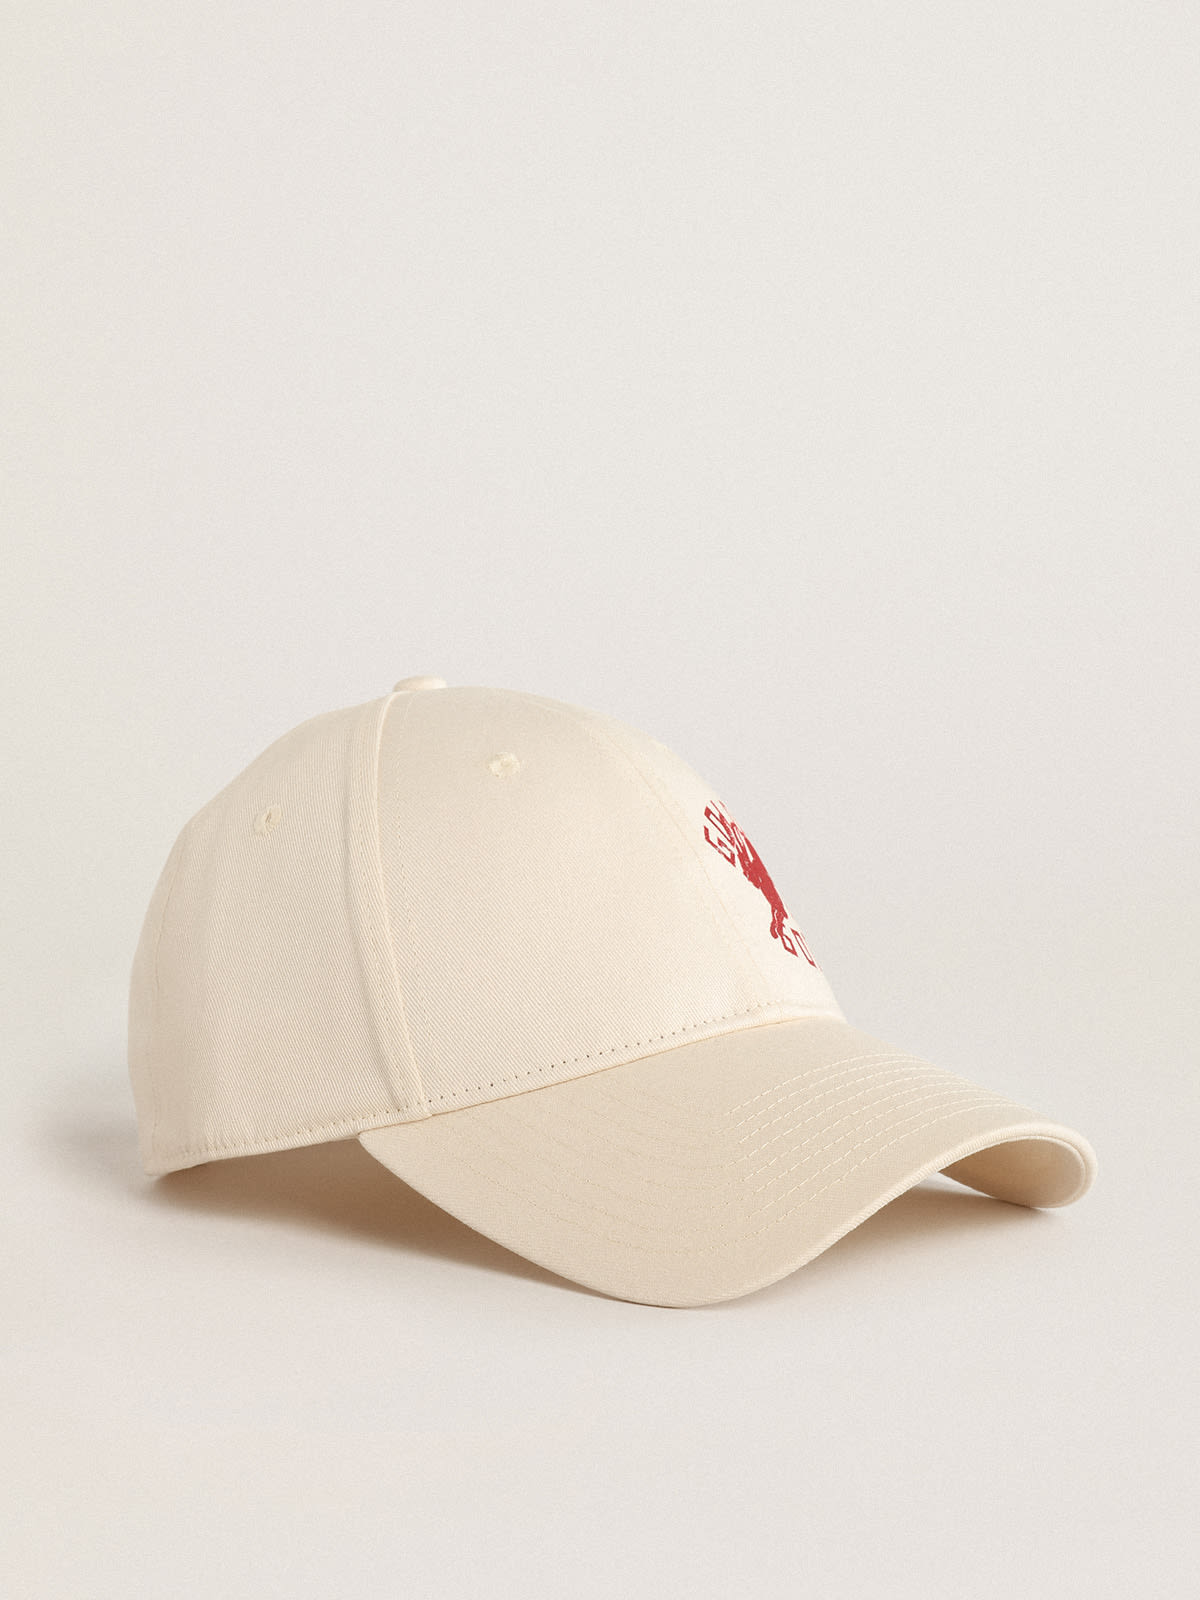 Golden Goose - Heritage white baseball cap with CNY logo in 